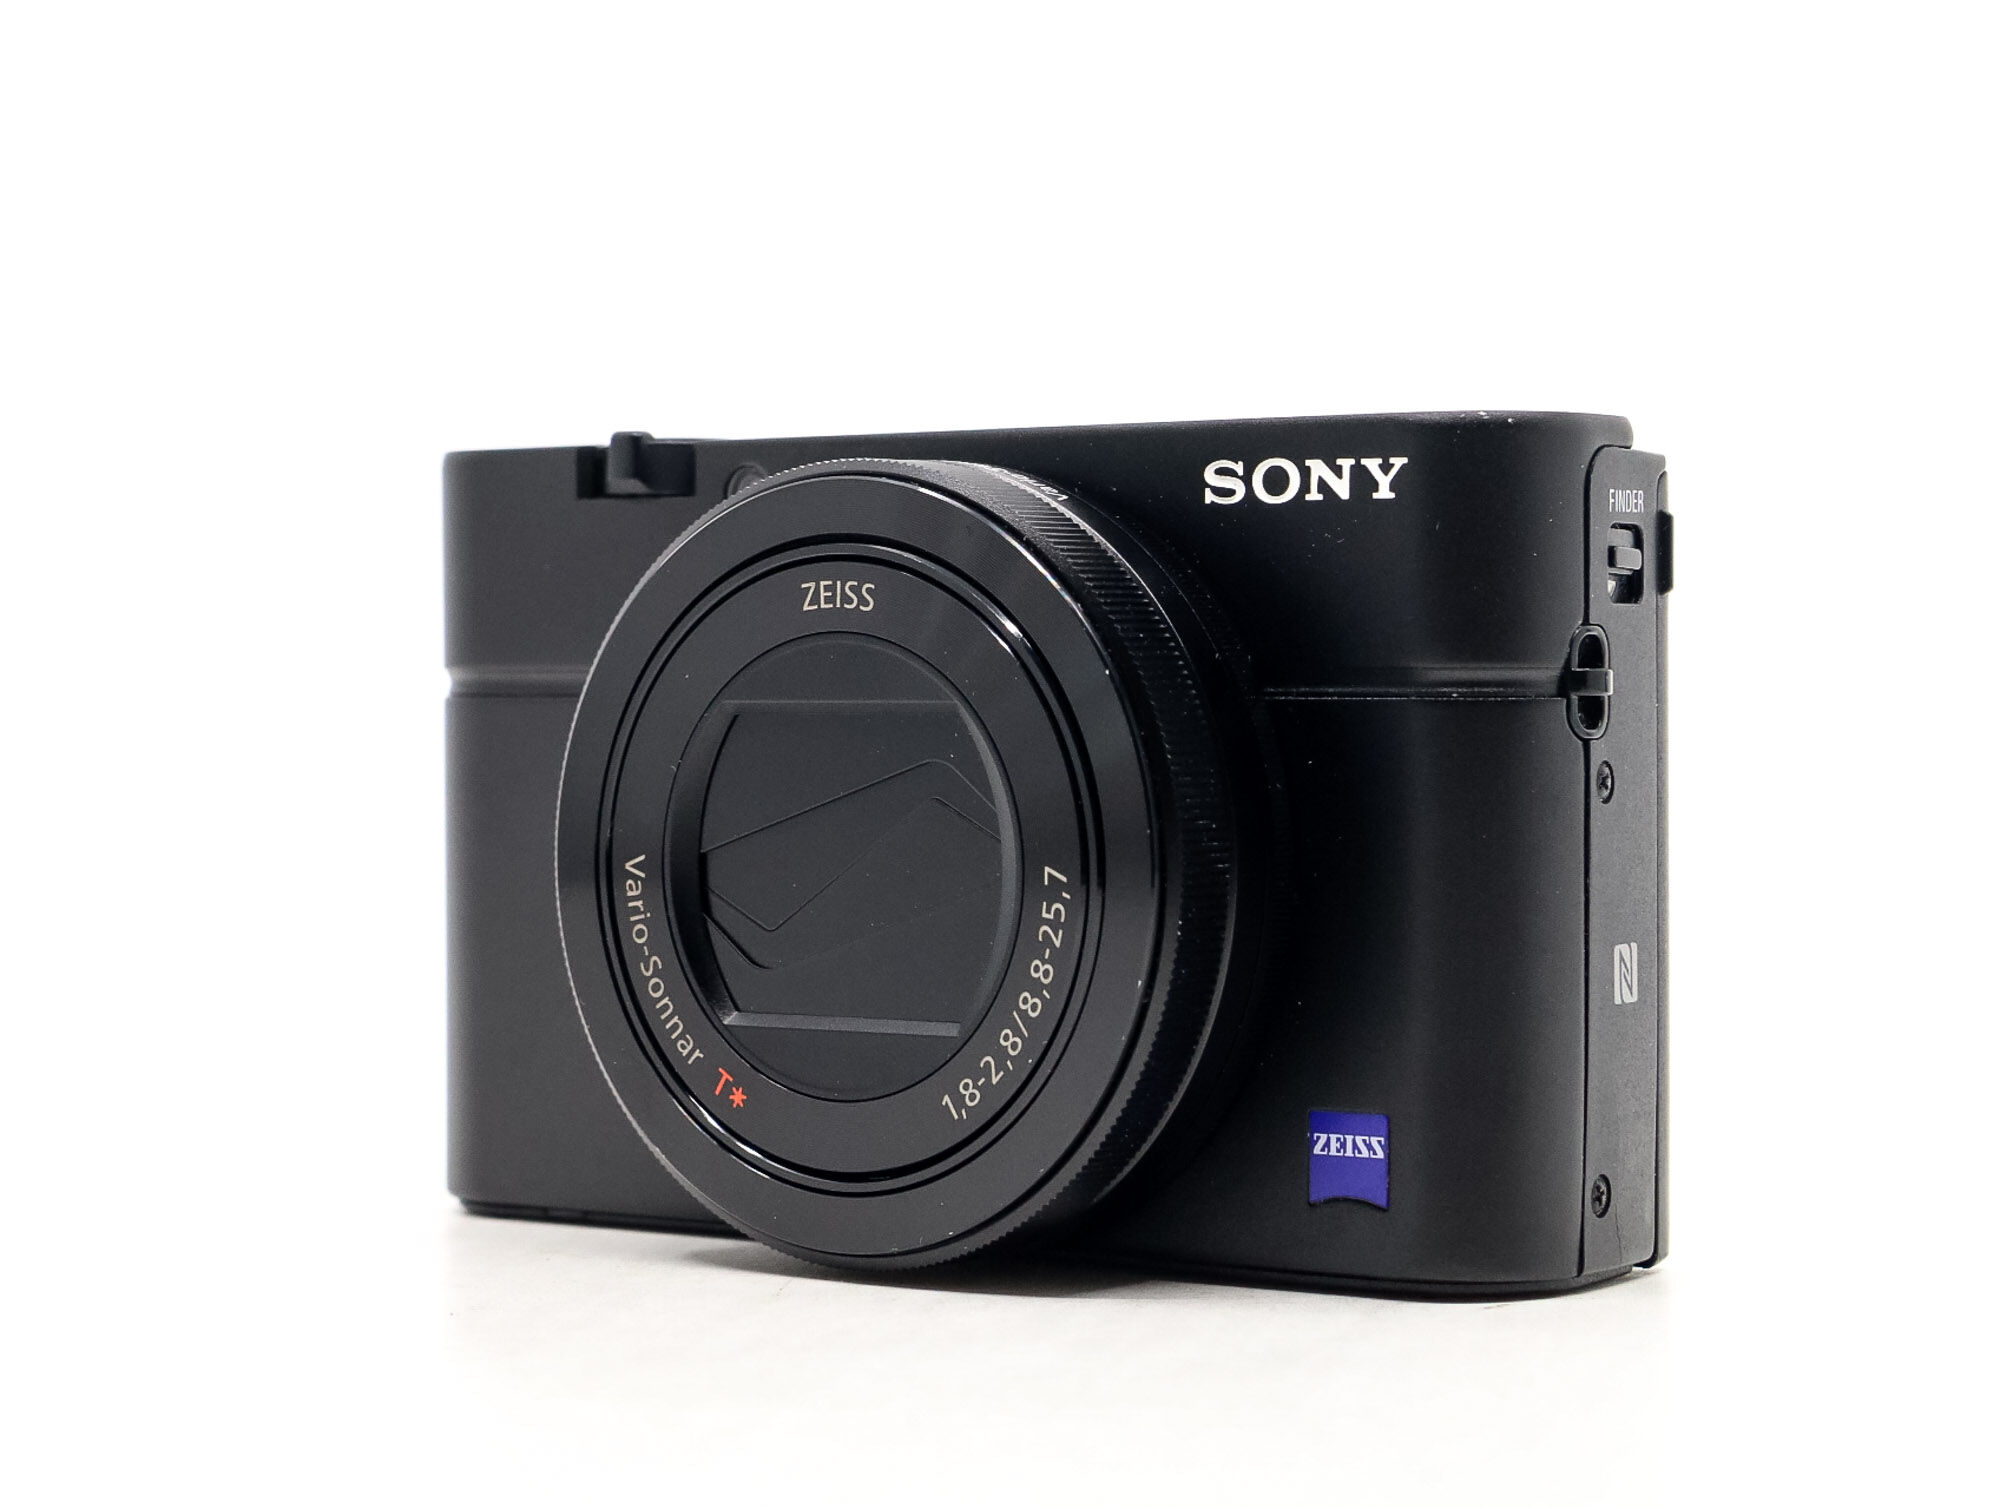 Sony Cyber-shot RX100 Mark III (Condition: Excellent)